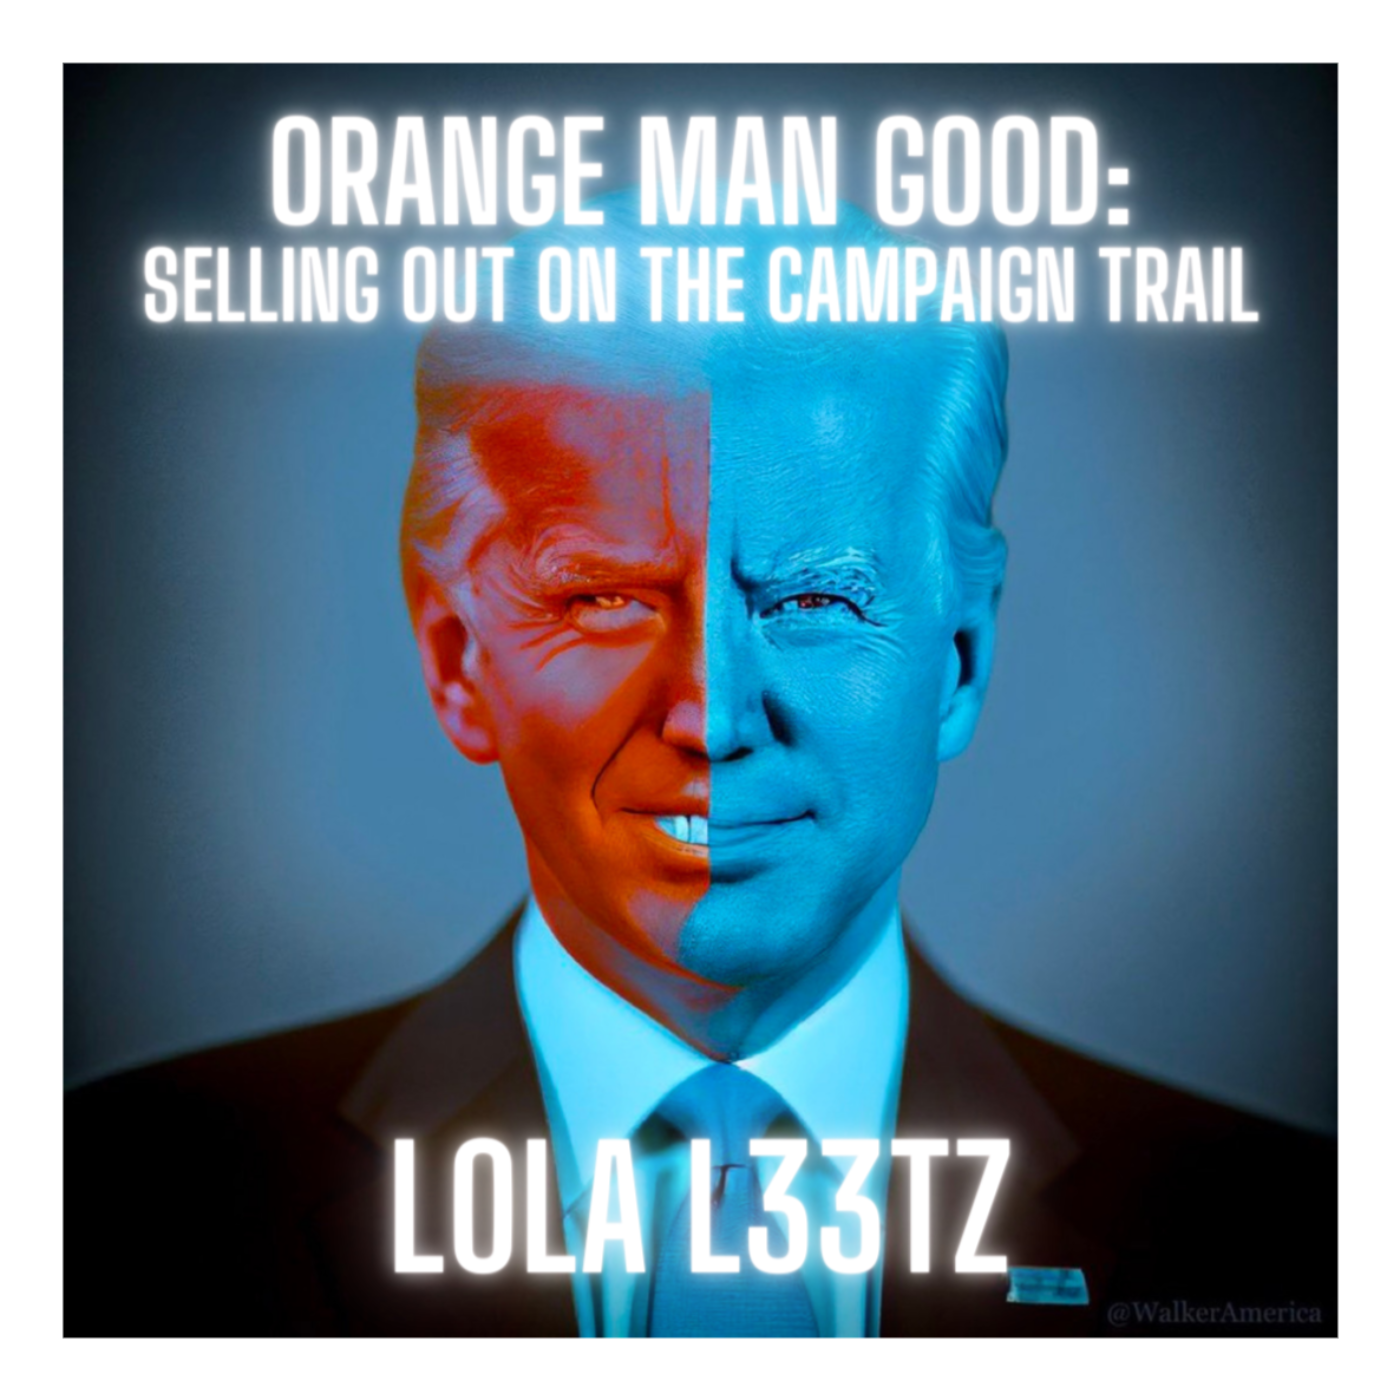 ORANGE MAN GOOD: SELLING OUT ON THE CAMPAIGN TRAIL - L0LA L33TZ (Bitcoin Out Loud on THE Bitcoin Podcast)